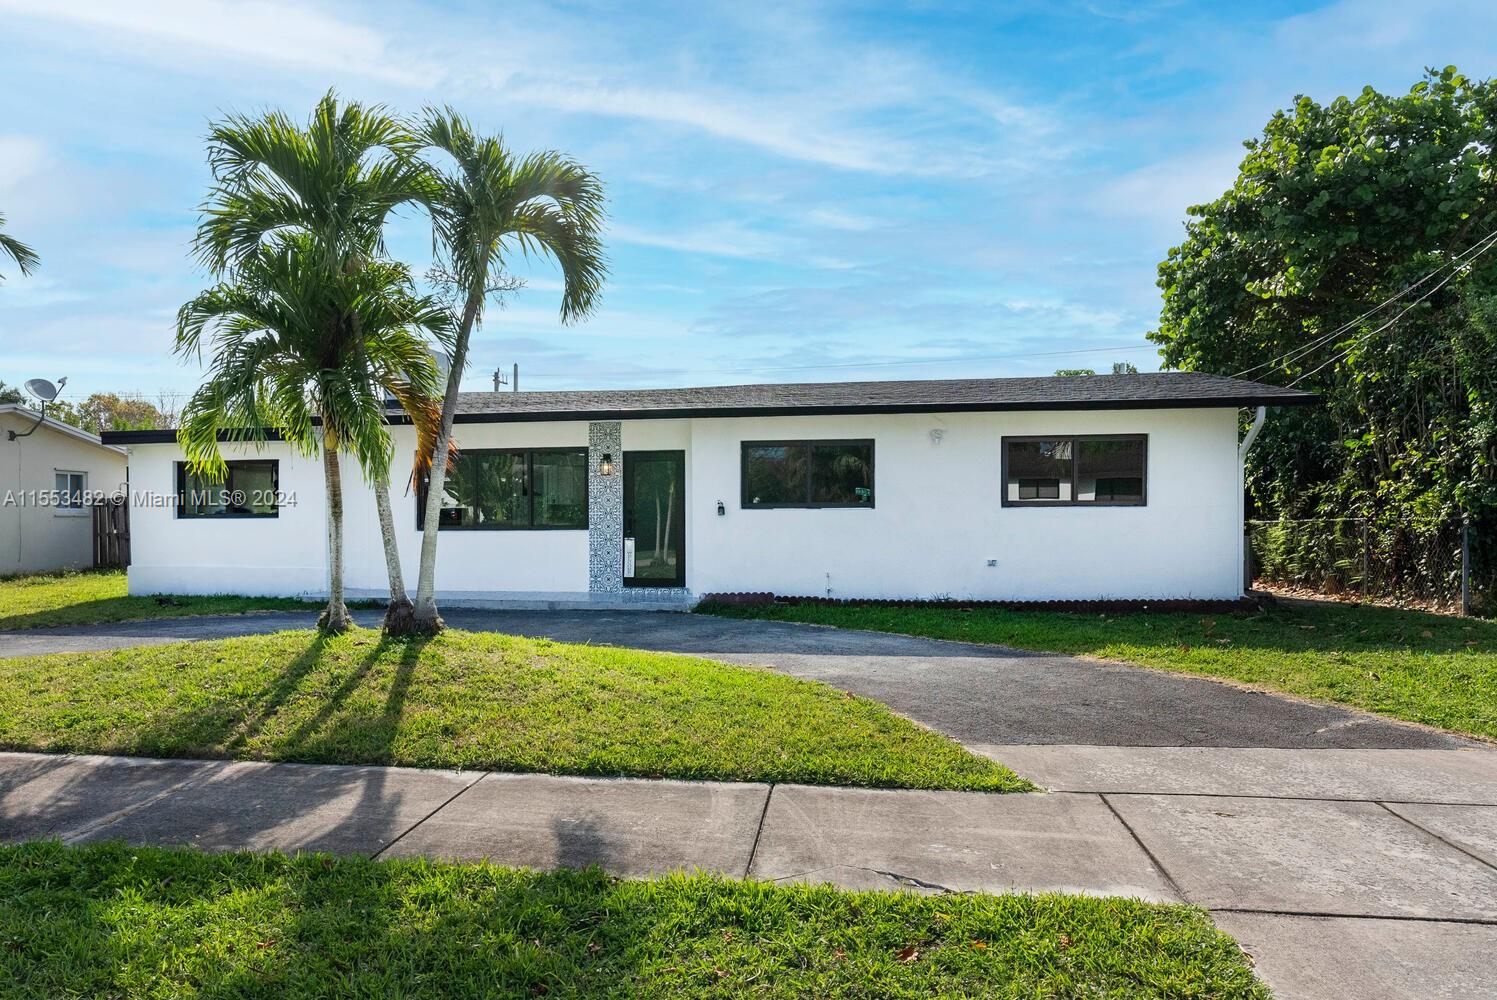 12601 SW 84th Ave Rd  For Sale A11553482, FL